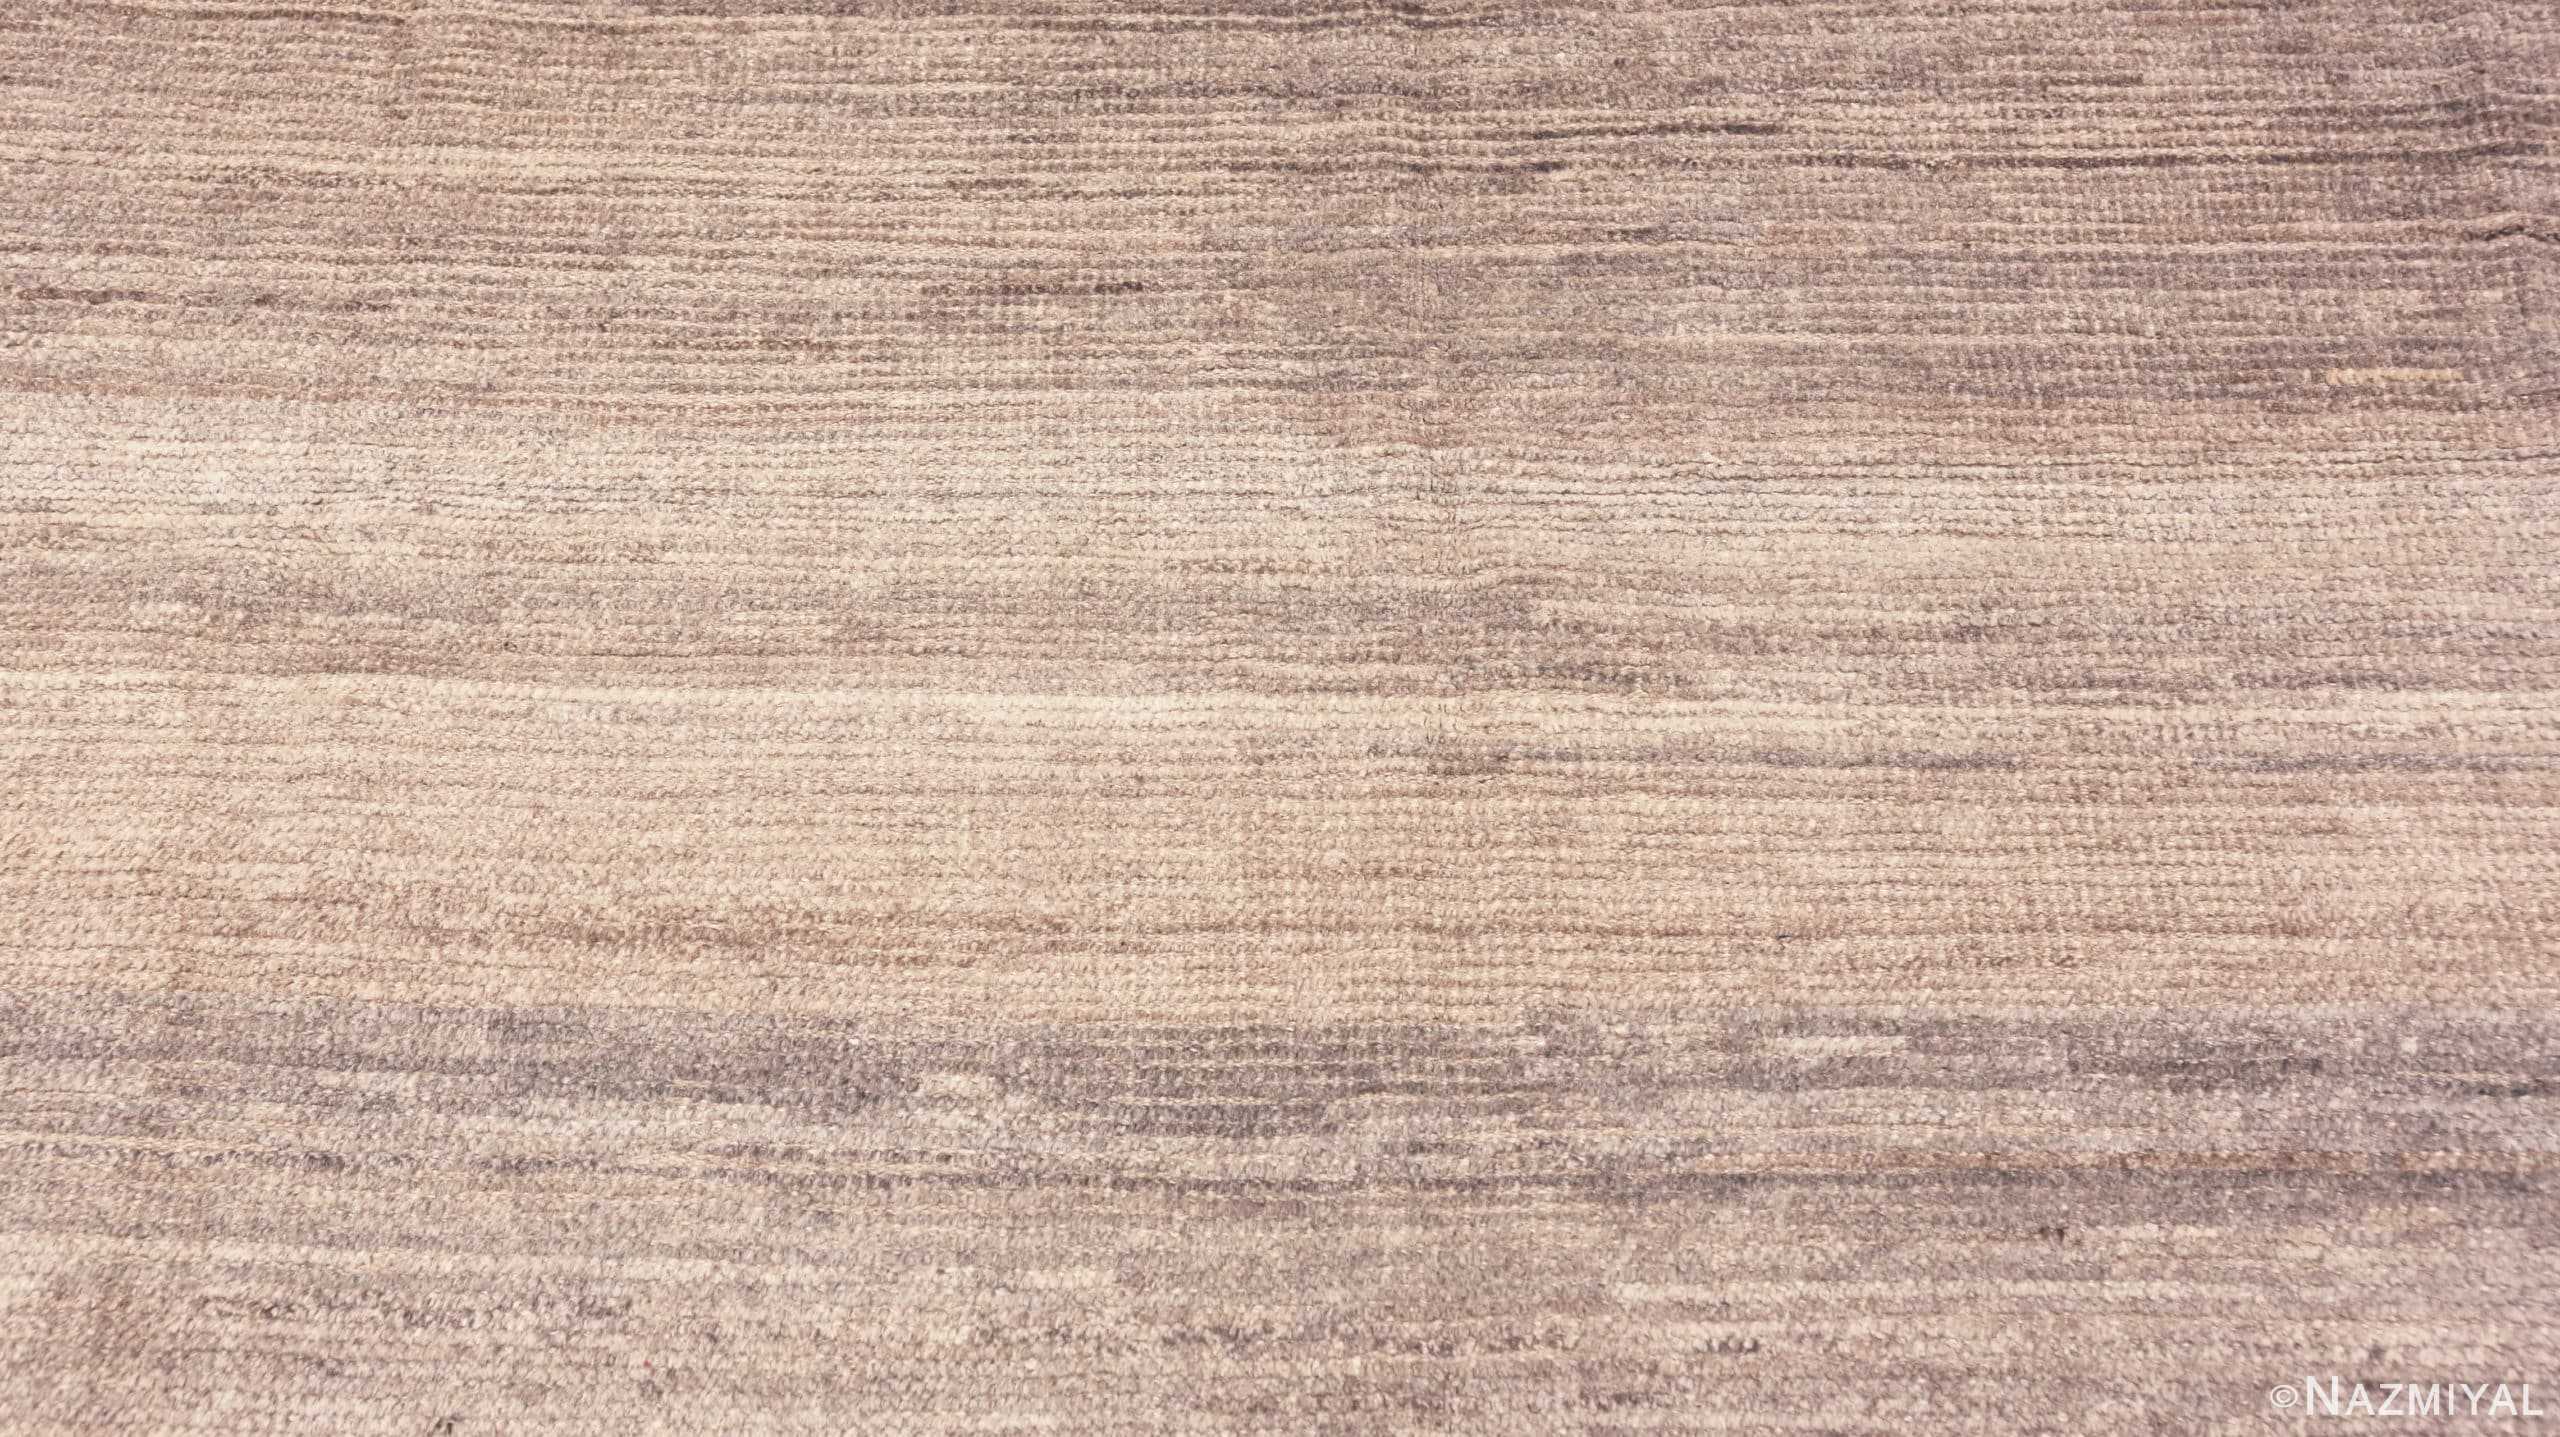 Texture Of Decorative Soft Color Modern Distressed Area Rug 60951 by Nazmiyal Antique Rugs